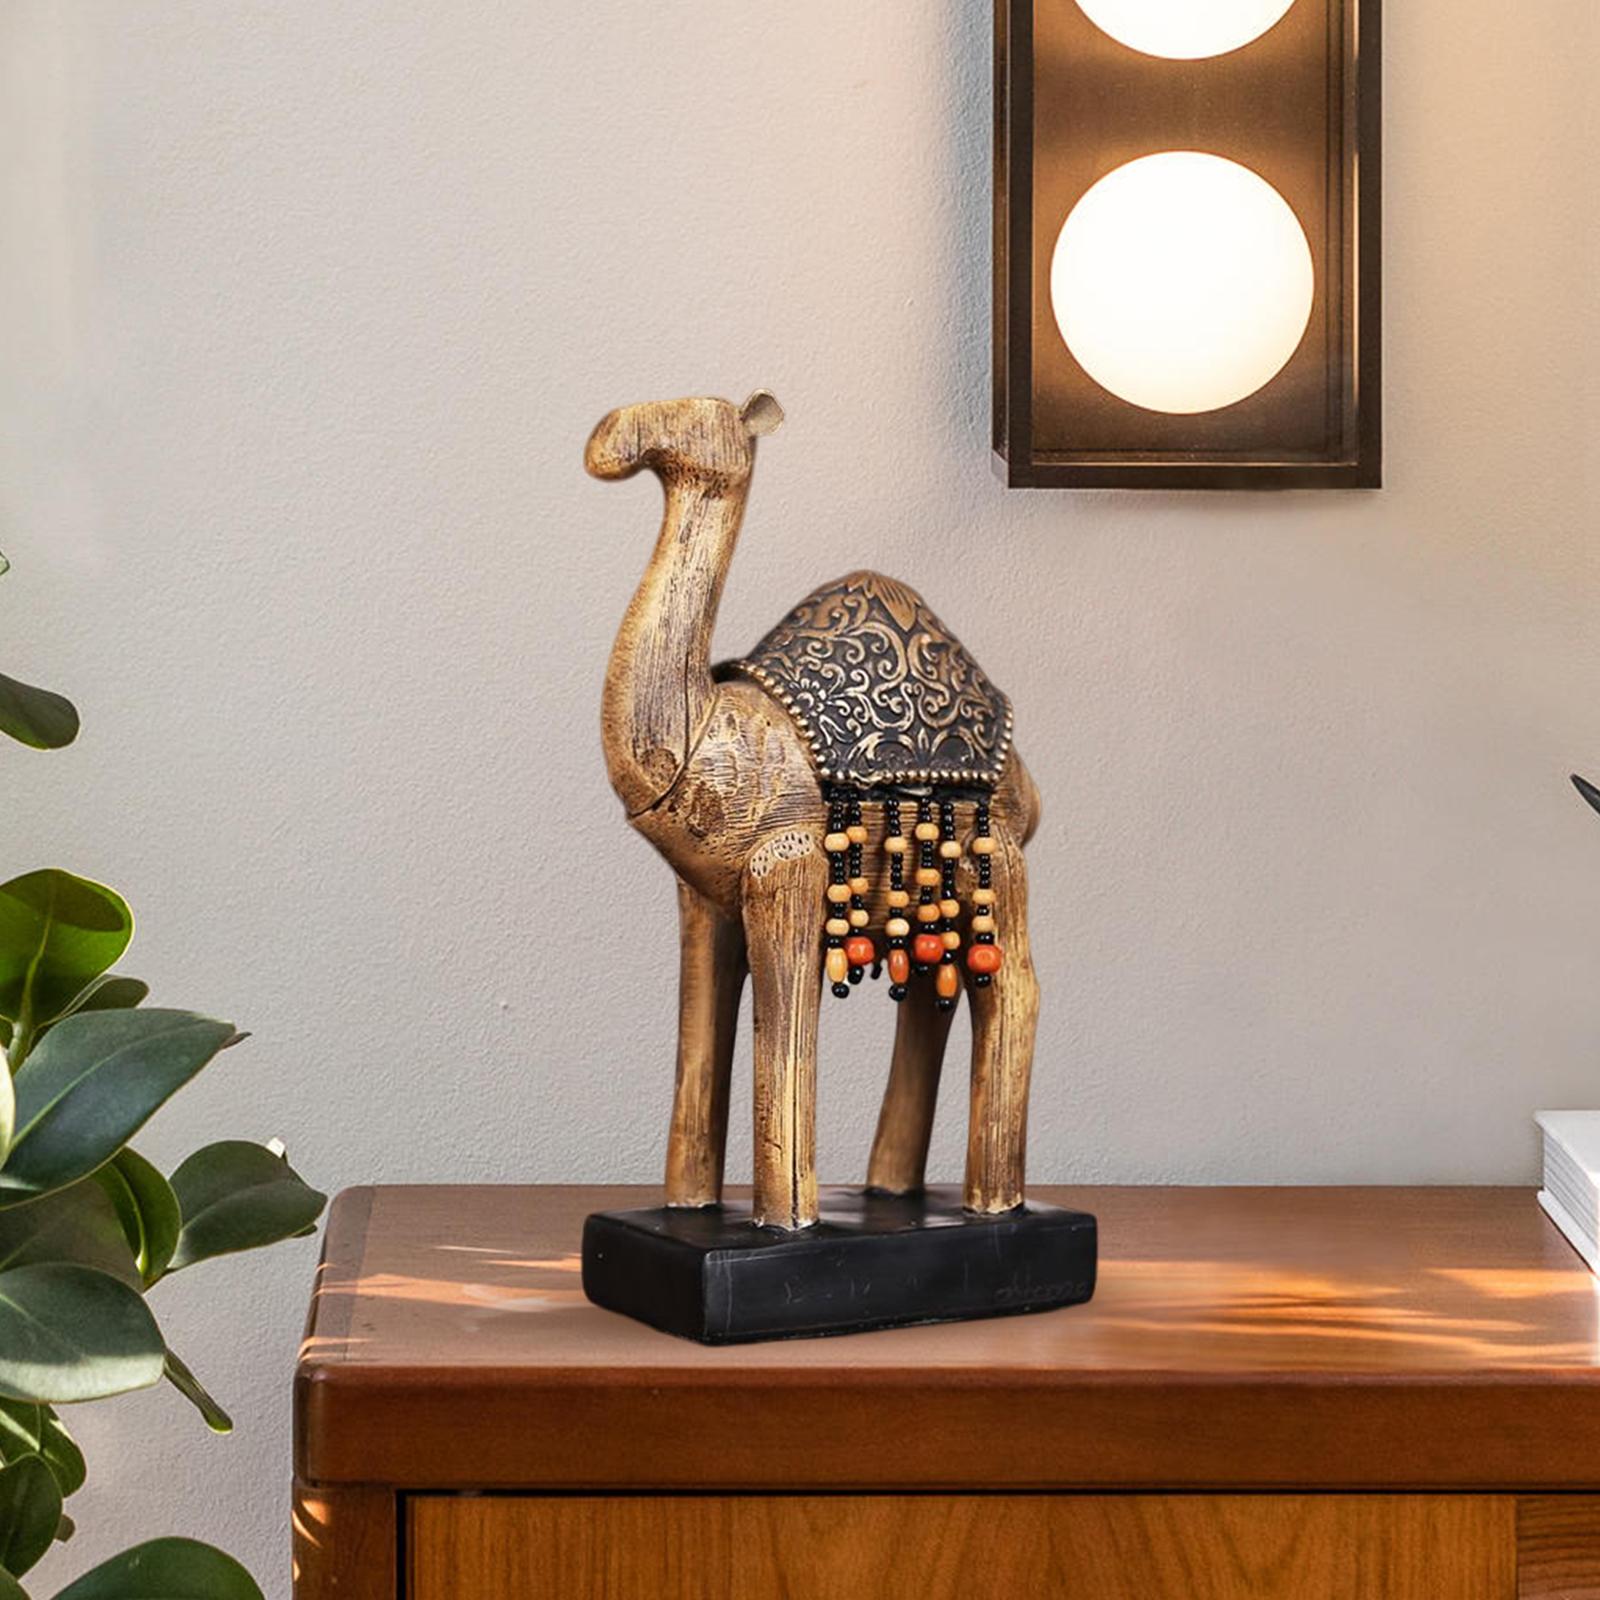 Exquisite Camel Ornament Decoration Collectibles for Centerpieces Display Standing S